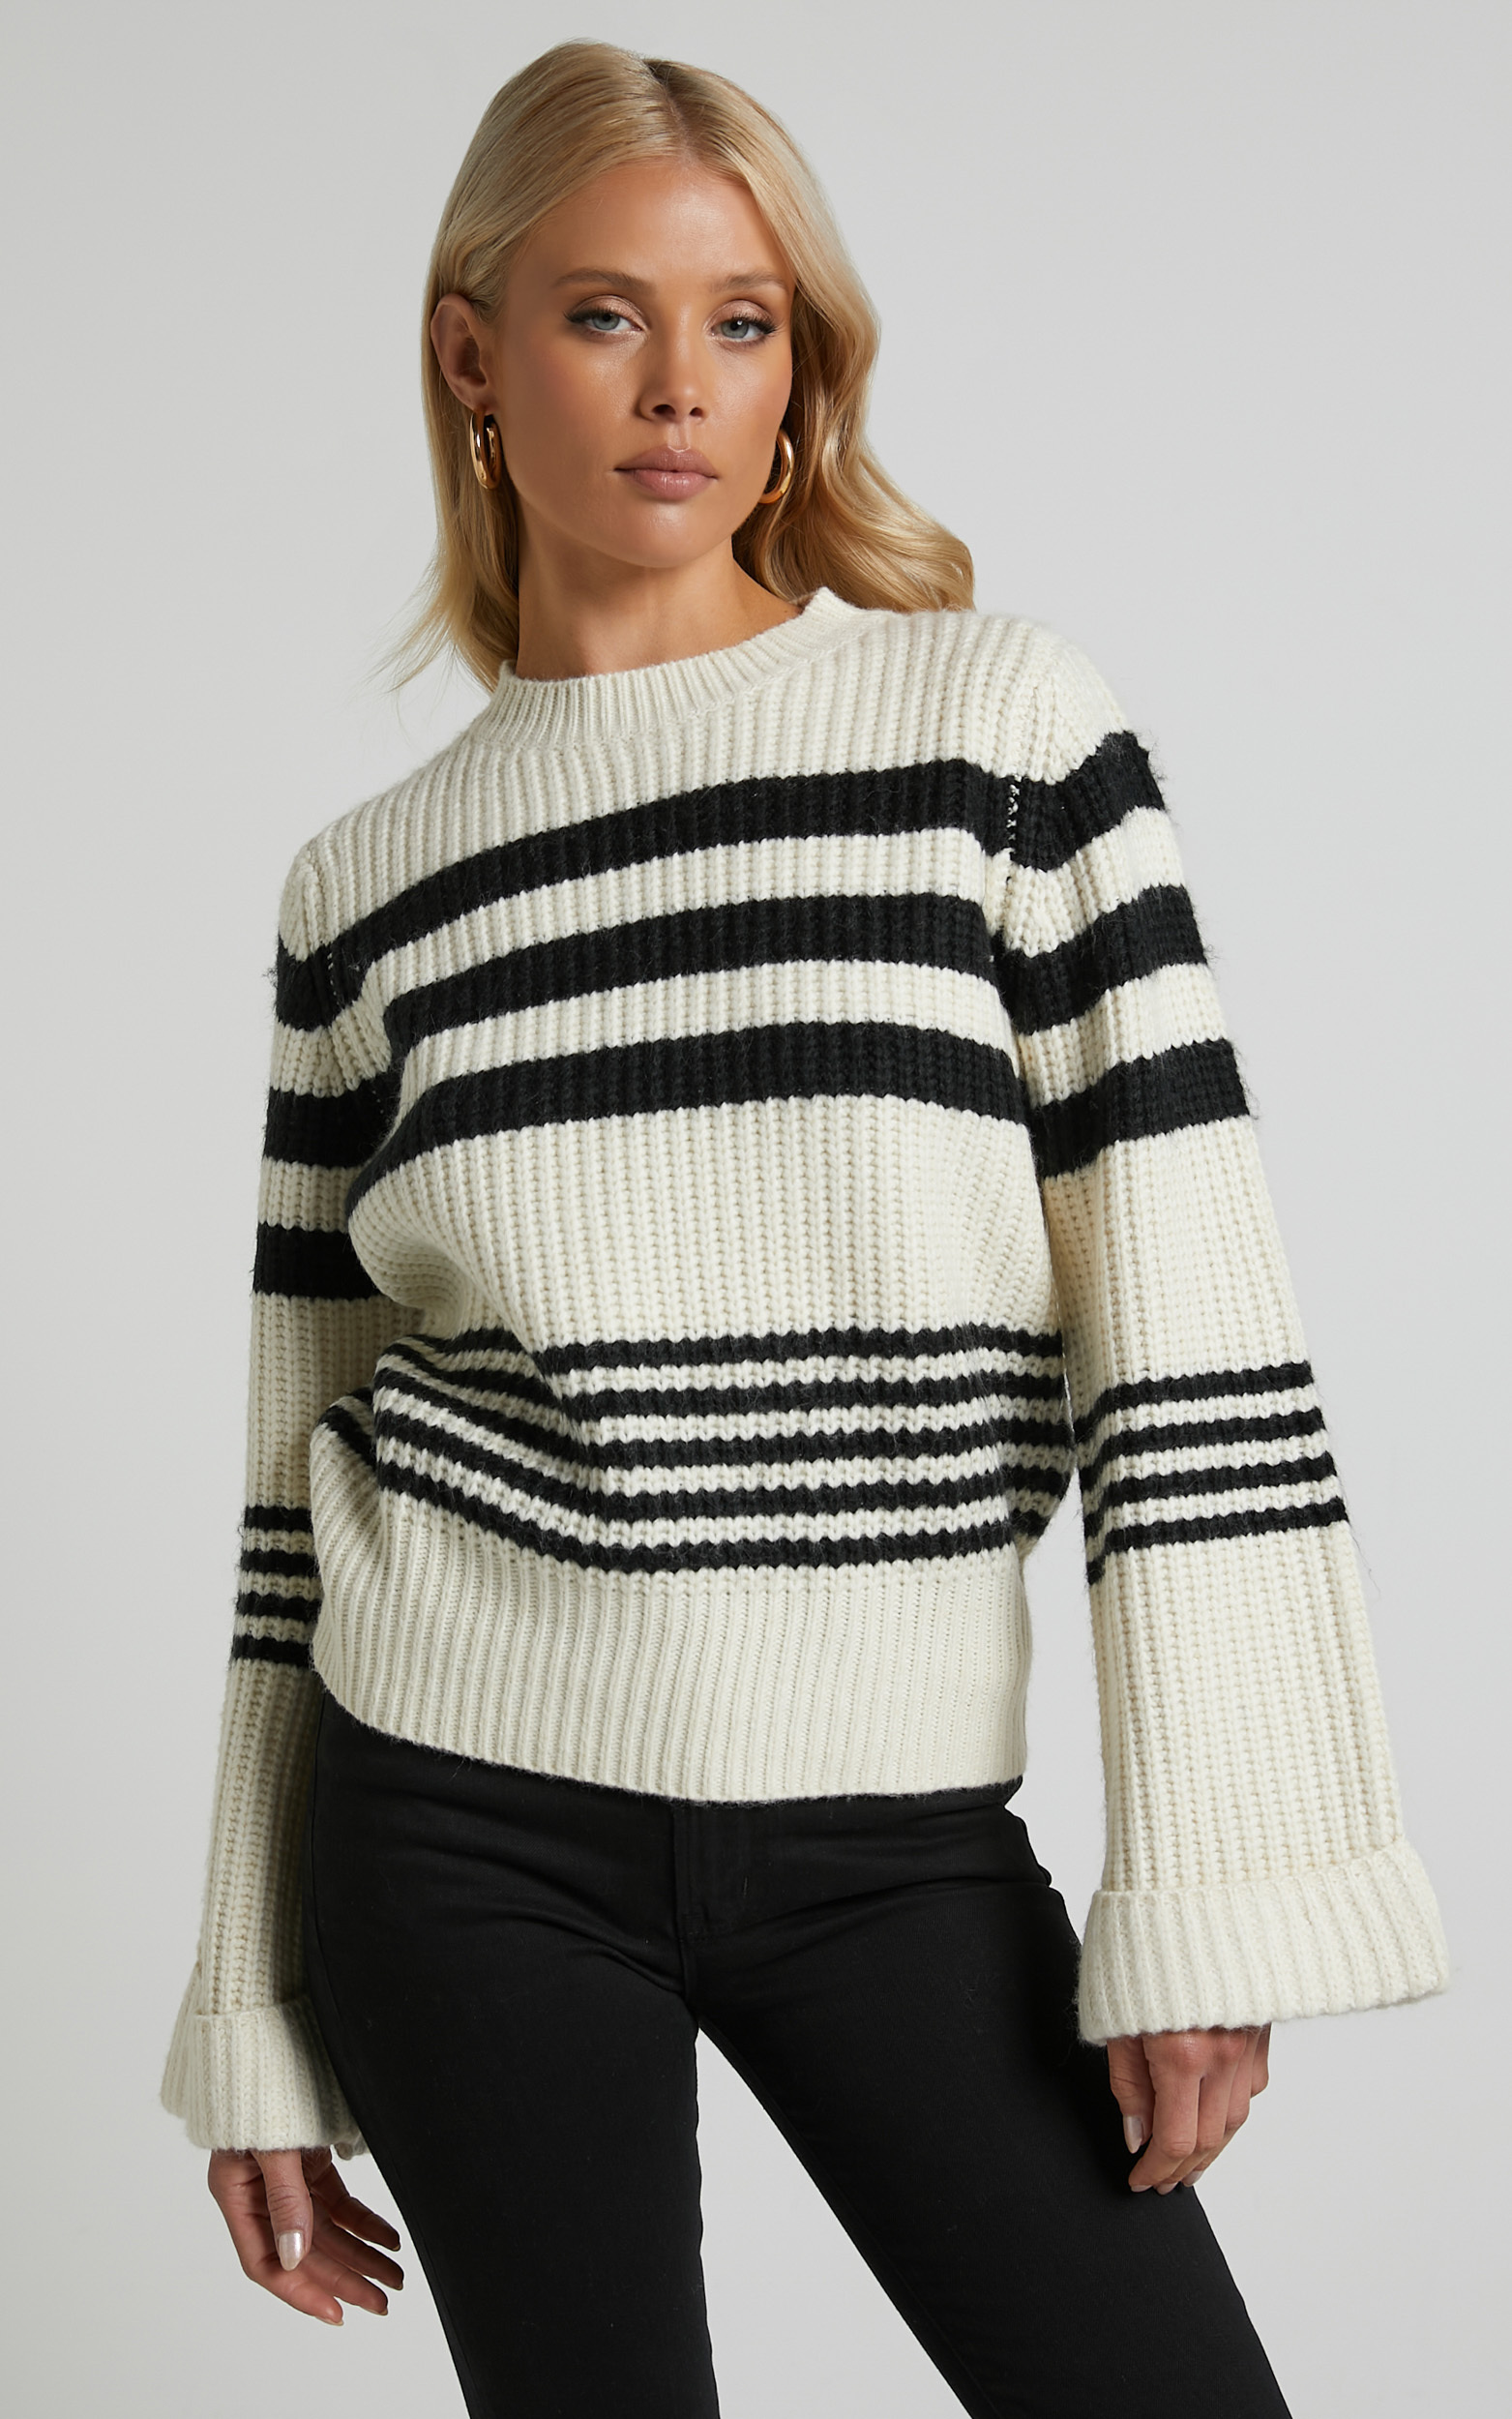 Pheney striped crew neck knit sweater in Cream and Black - 06, CRE1, hi-res image number null